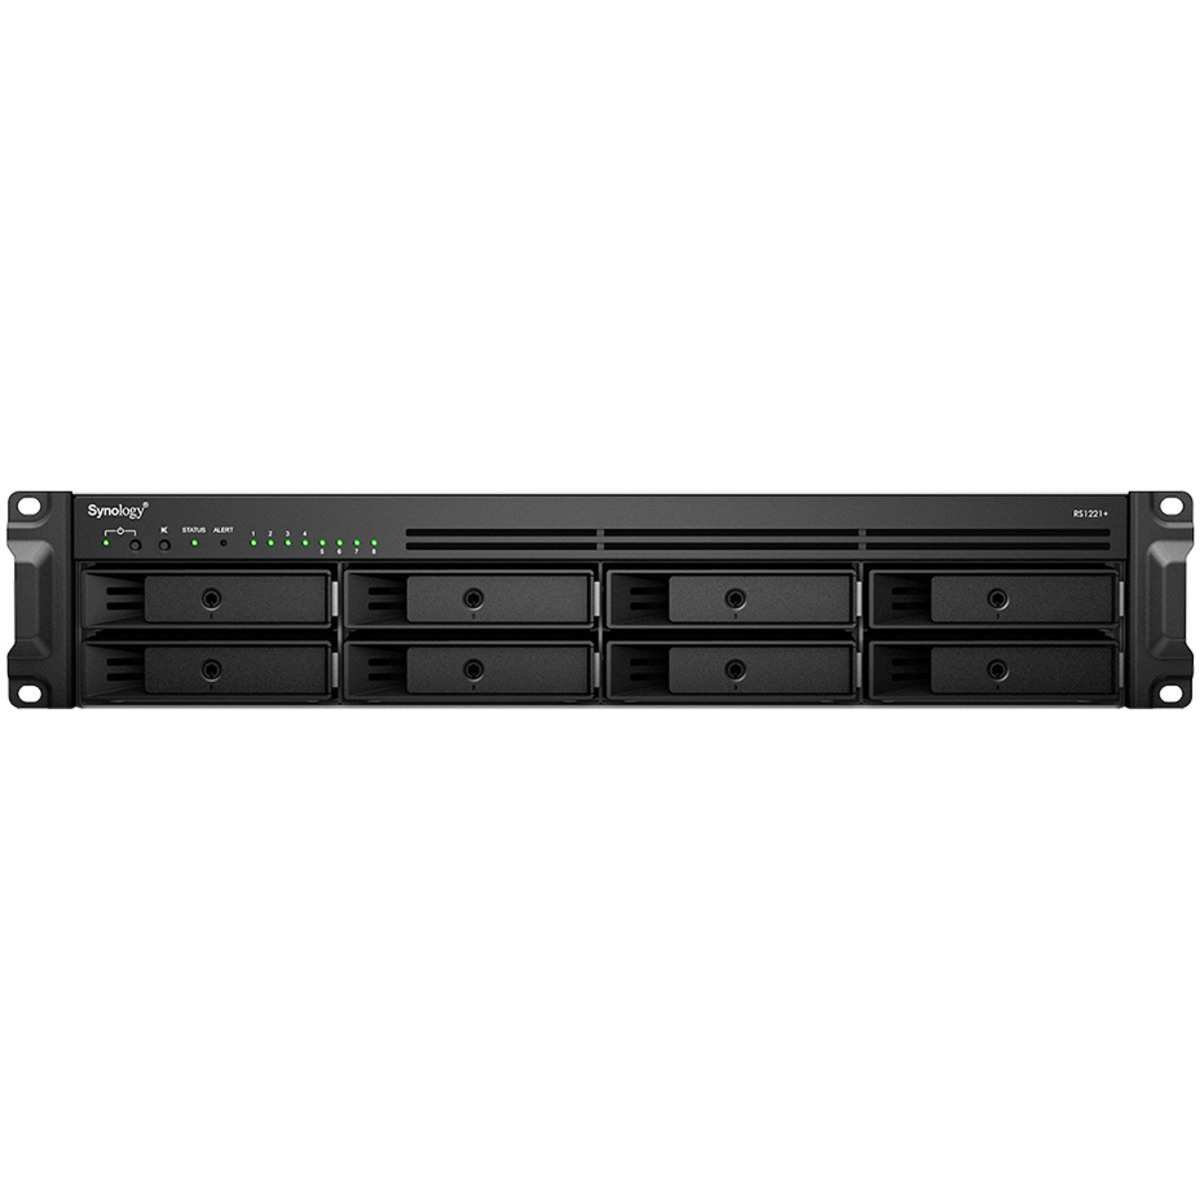 Synology RackStation RS1221RP+ RackMount 8-Bay Multimedia / Power User / Business NAS - Network Attached Storage Device Burn-In Tested Configurations - FREE RAM UPGRADE RackStation RS1221RP+